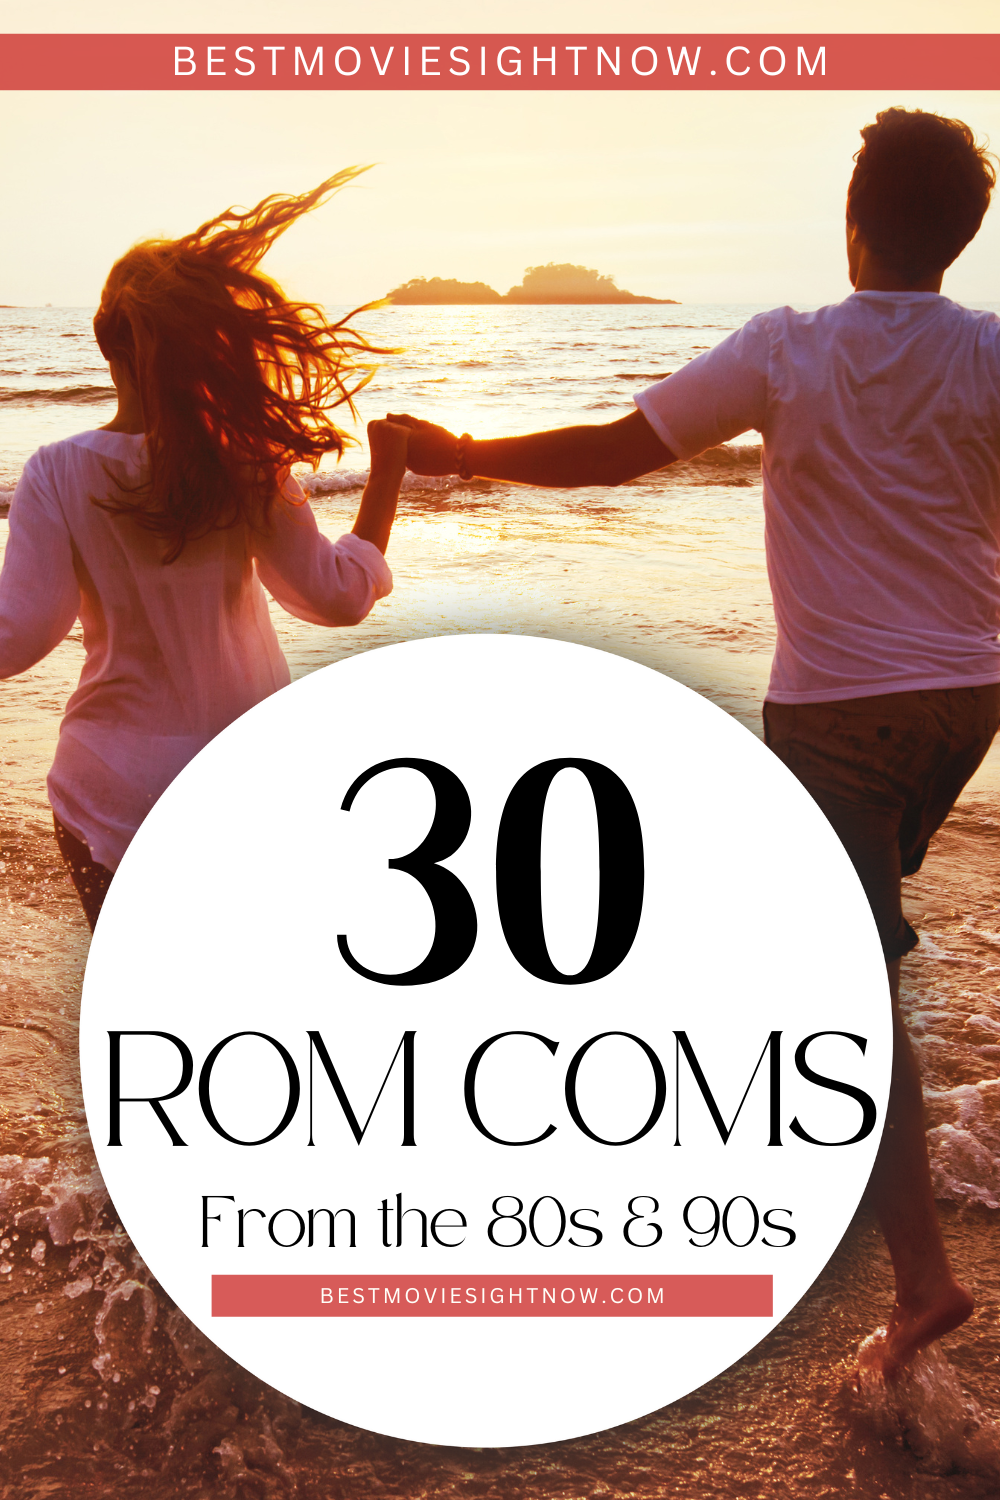 happy couple on honeymoon vacation travel, beach holidays with text: "Rom coms from the 80s & 90s"